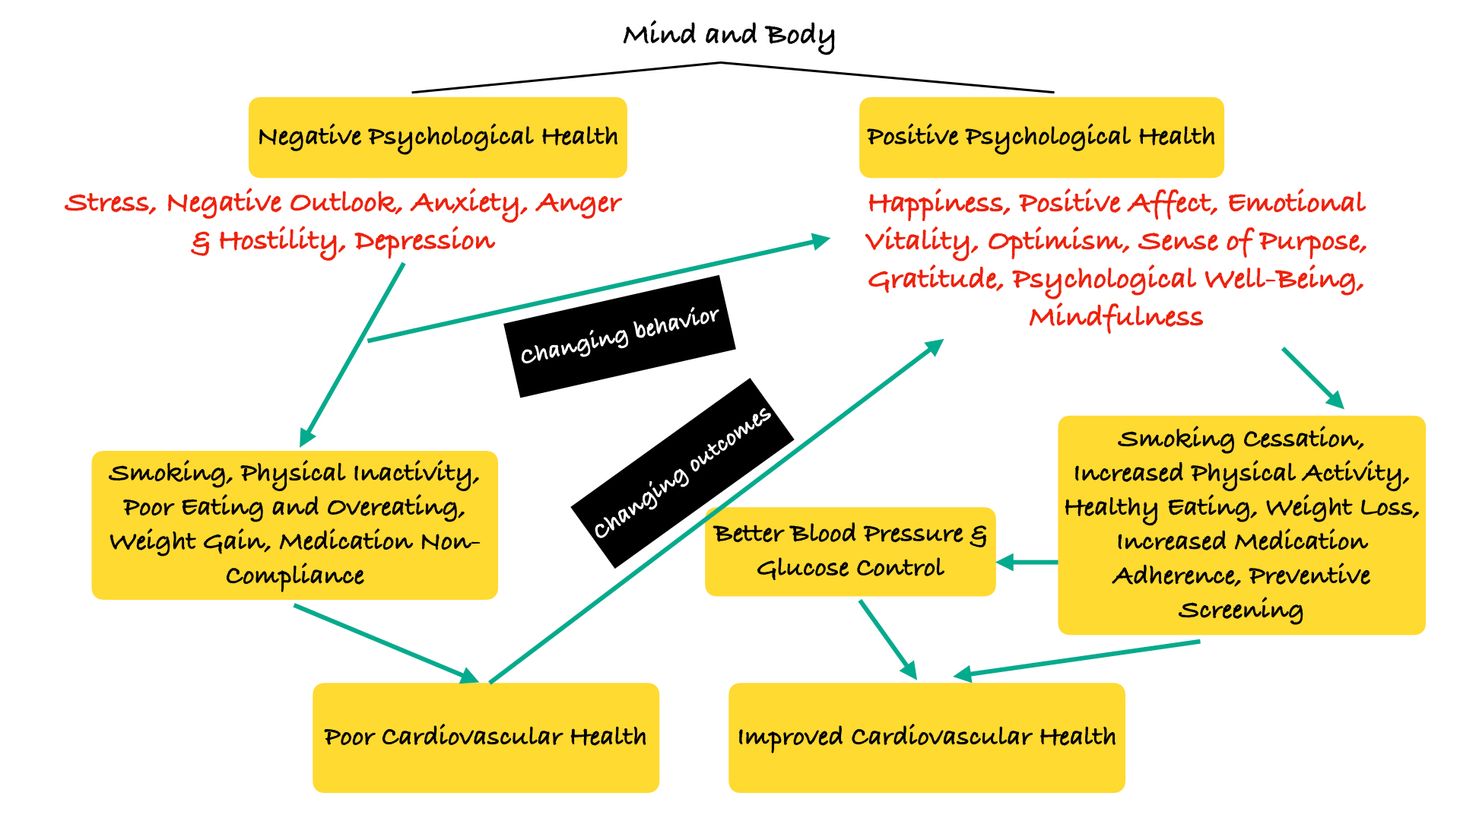 The Mind-Body Connect and Positive Psychological Health